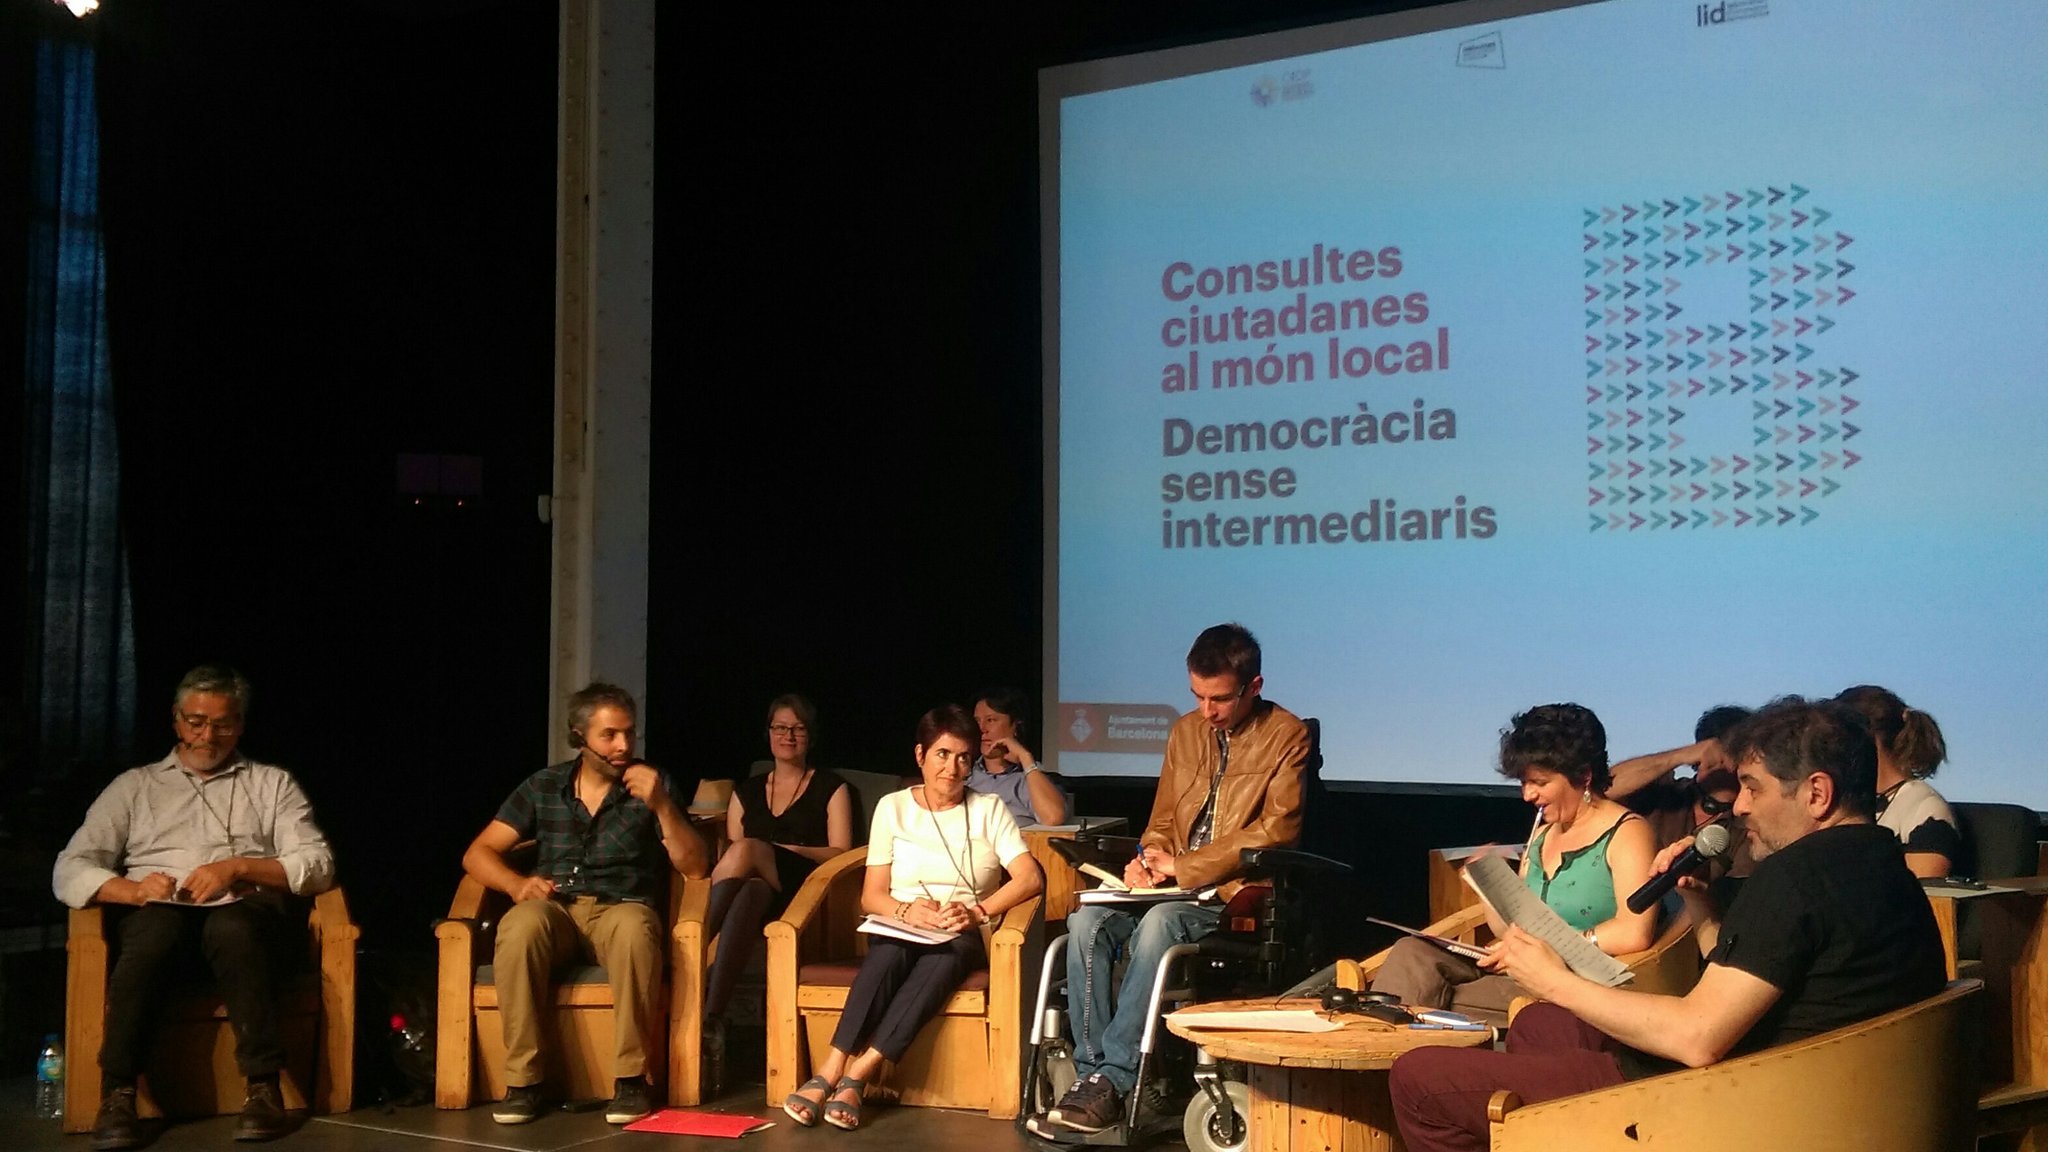 Barcelona organizes the workshop Citizens' Consultations in a Local World: Democracy without Intermediation